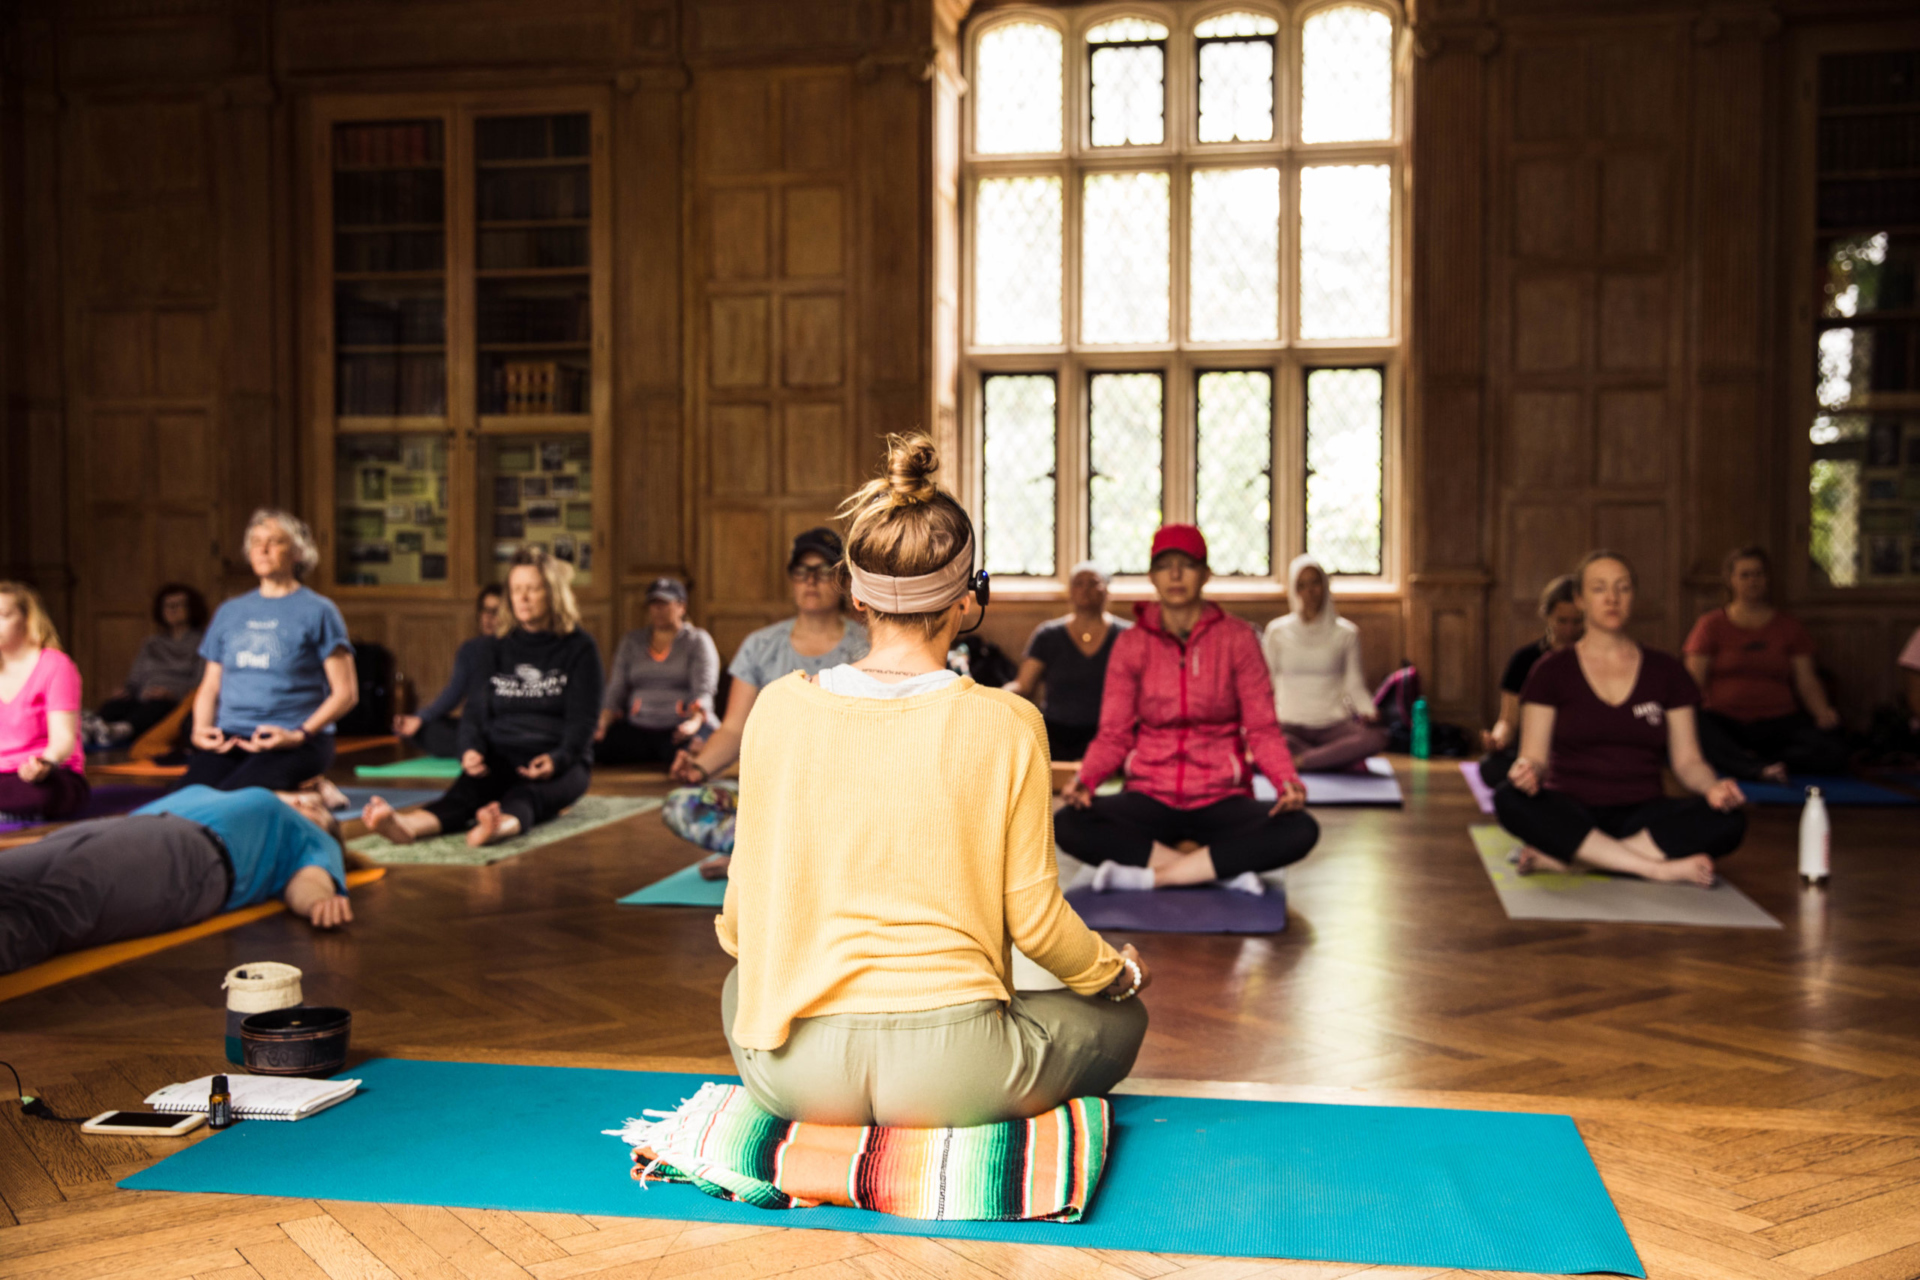 Yoga instructor Natalie Schilke leads an indoor yoga class at The Morton Arboretum in the Founders Room at Thornhill Education Center.